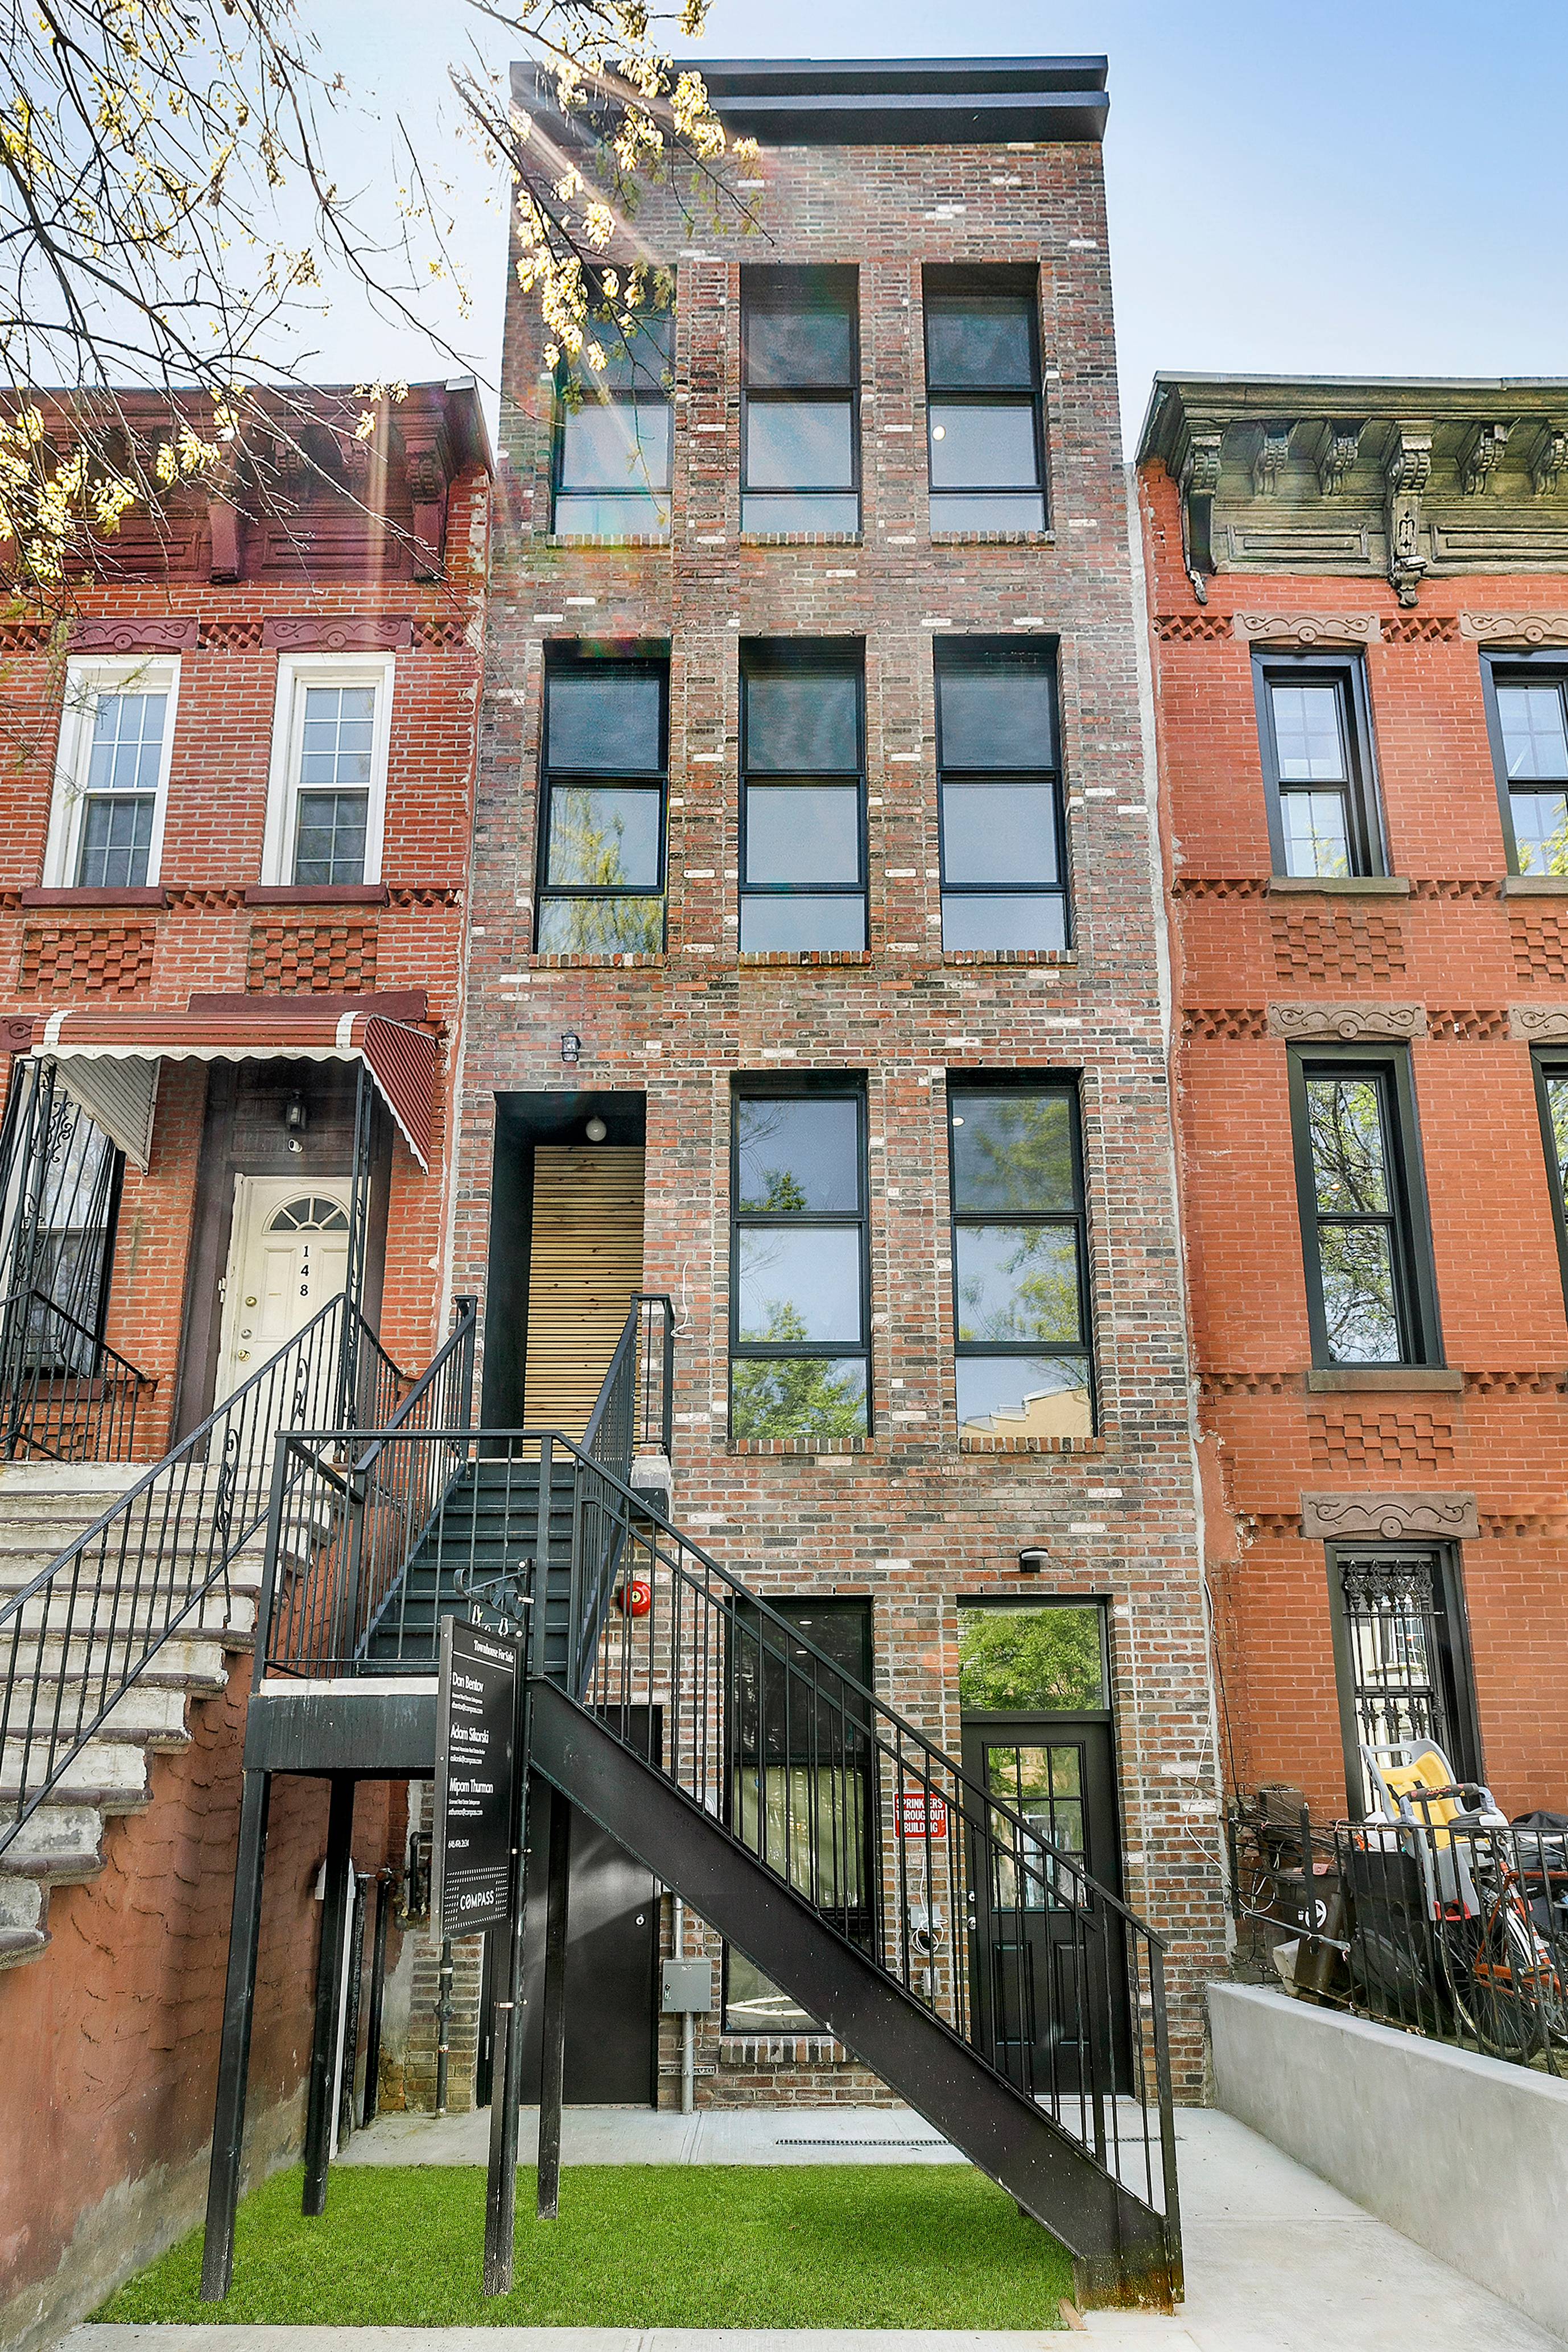 Brand new construction, brick townhouse in Bedstuy Brooklyn.